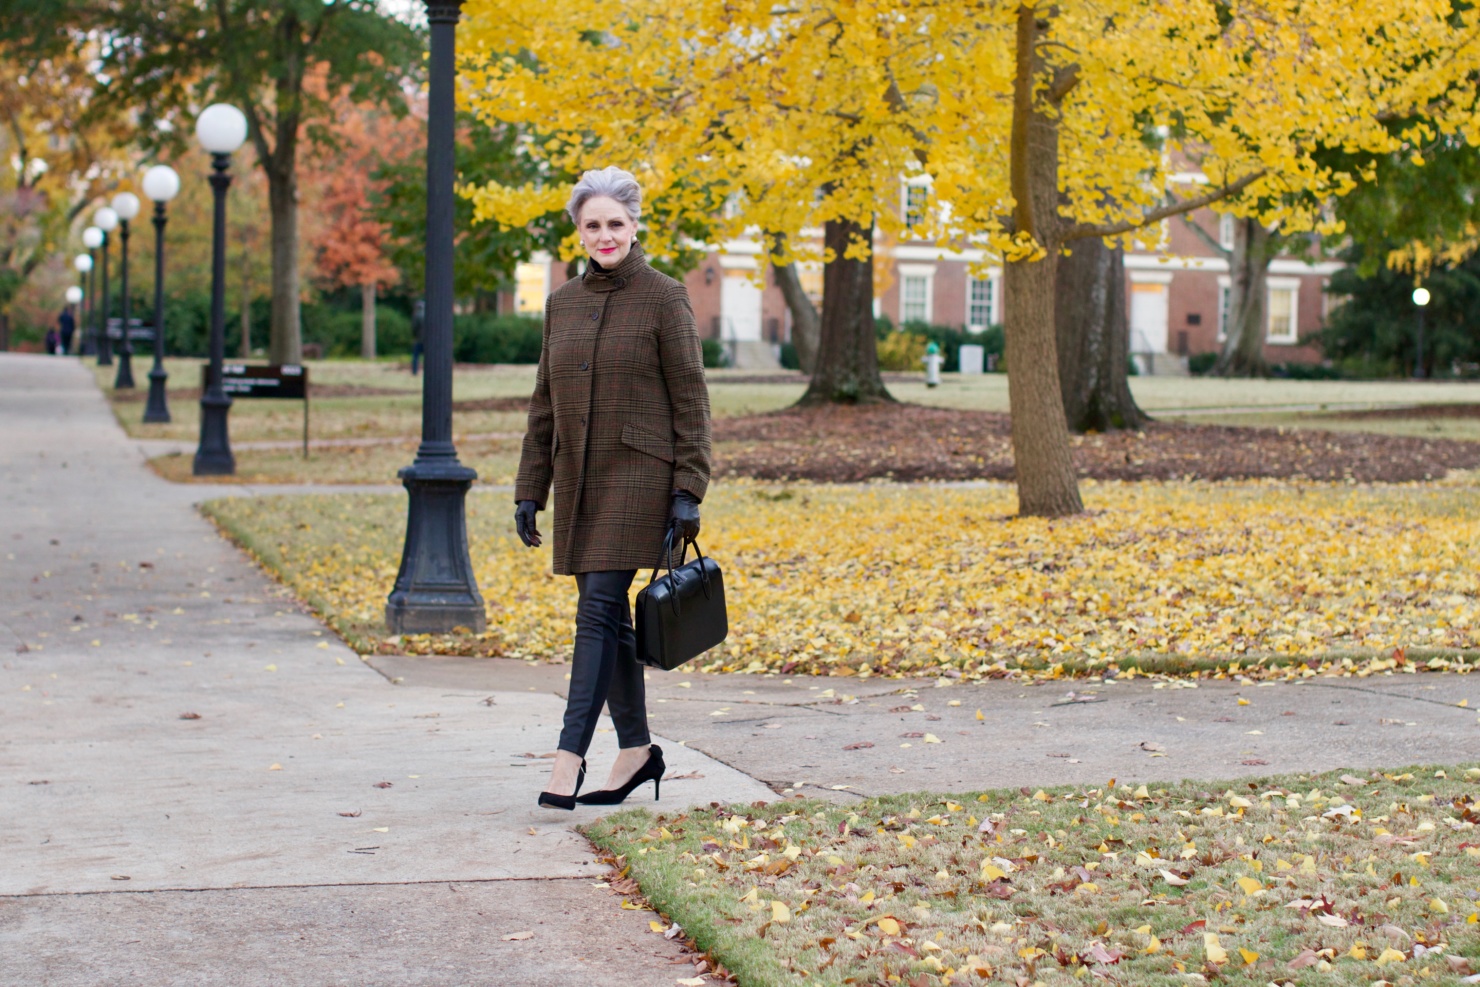 beth from Style at a Certain Age wears a black cashmere Turtleneck dress, faux leather leggings and suede pumps.